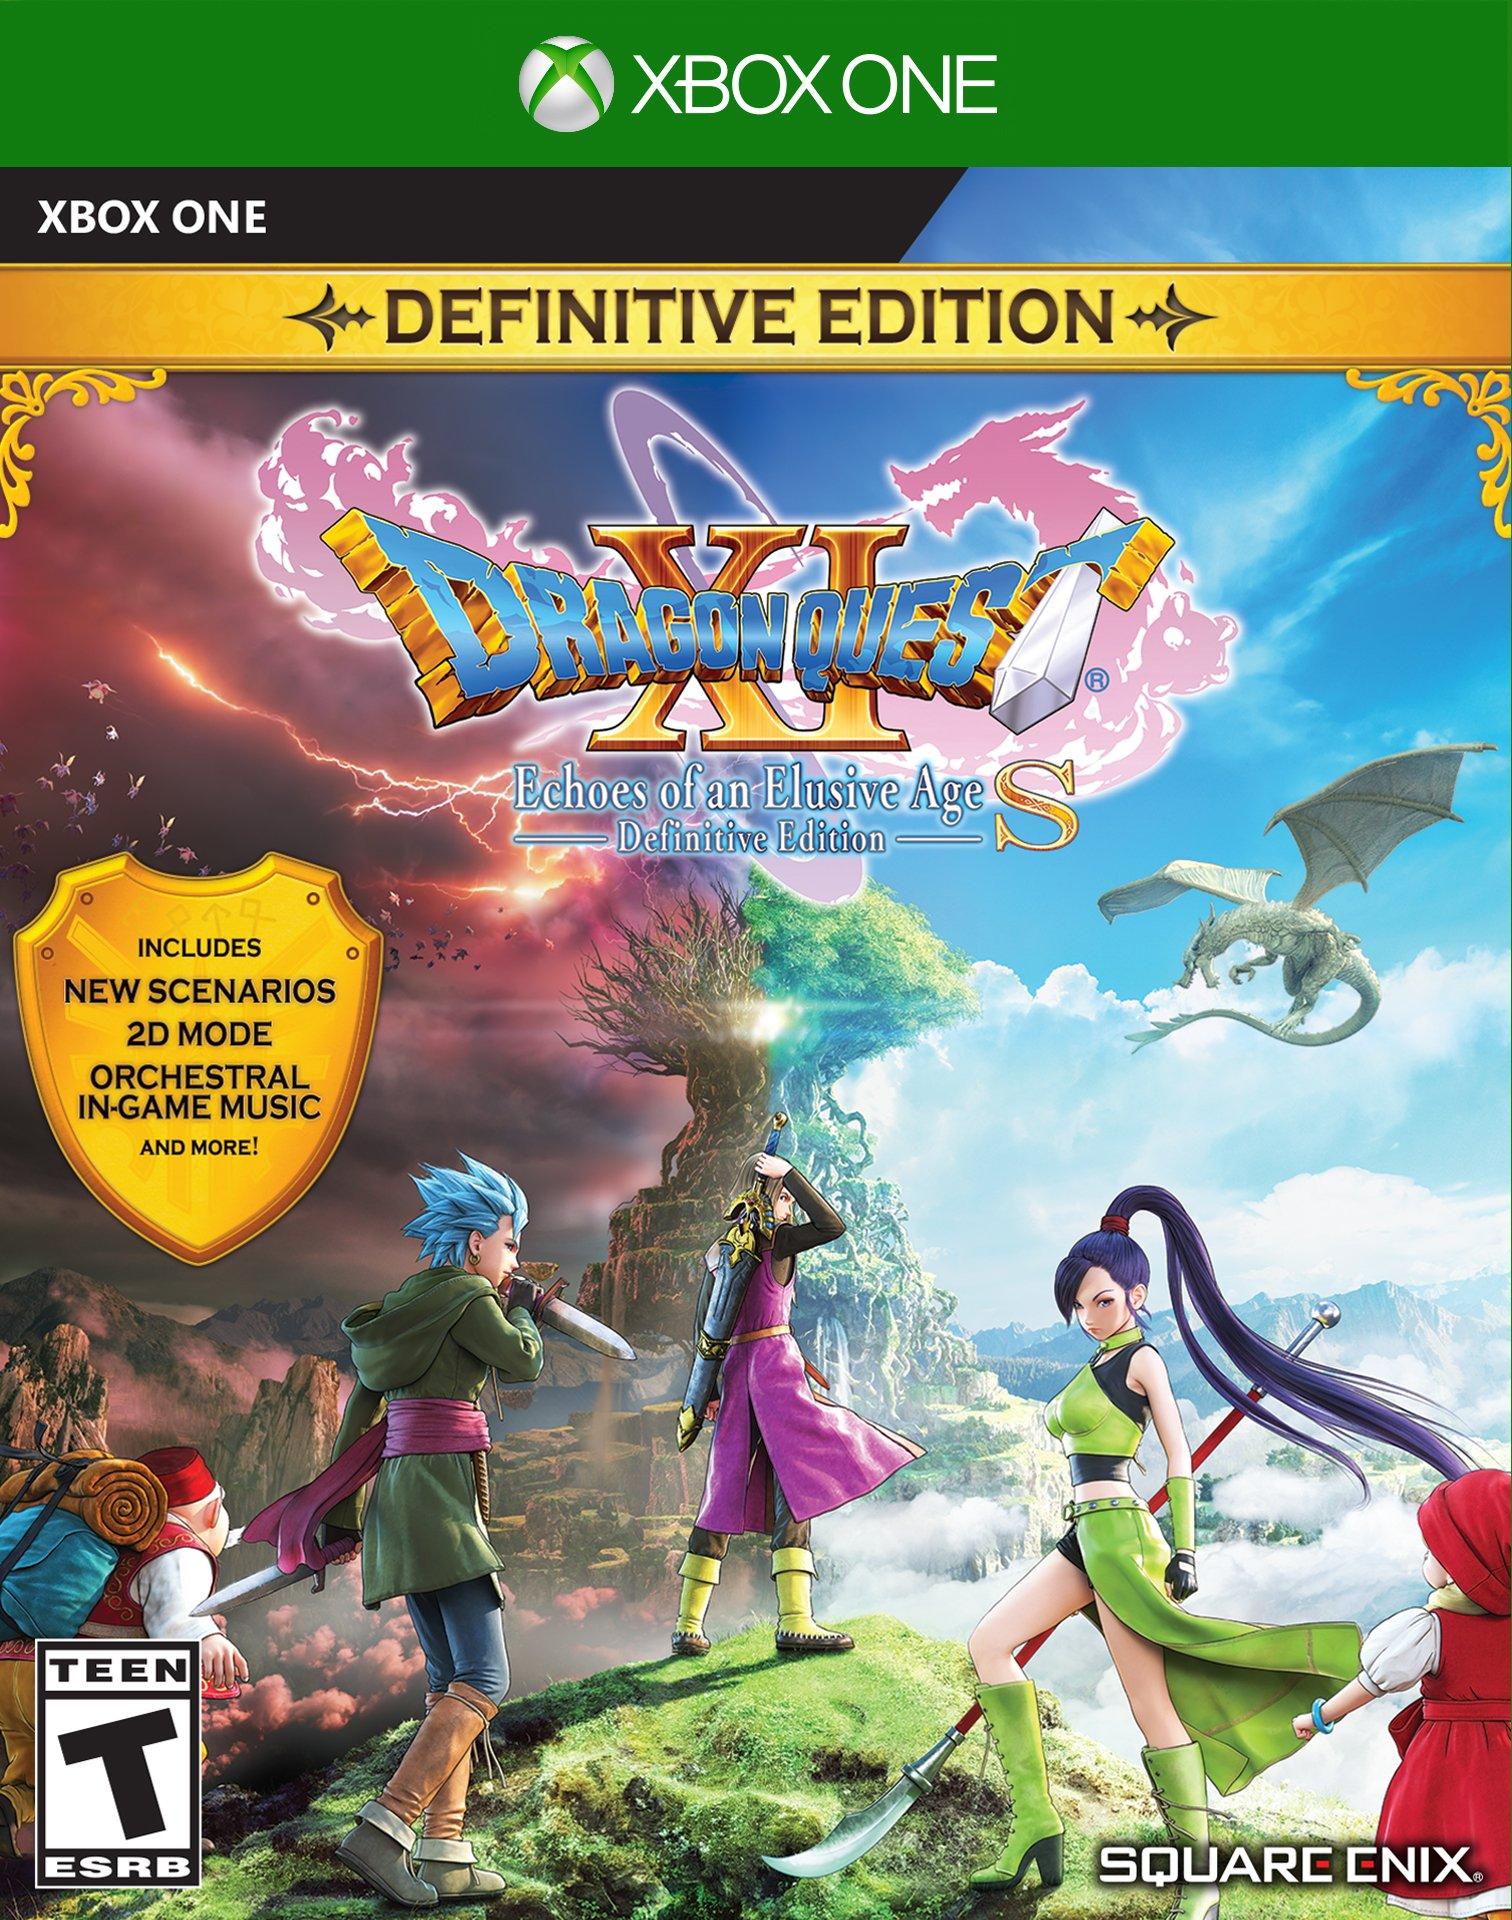 dragon-quest-xi-s-echoes-of-an-elusive-age-definitive-edition-xbox-one-xbox-one-gamestop